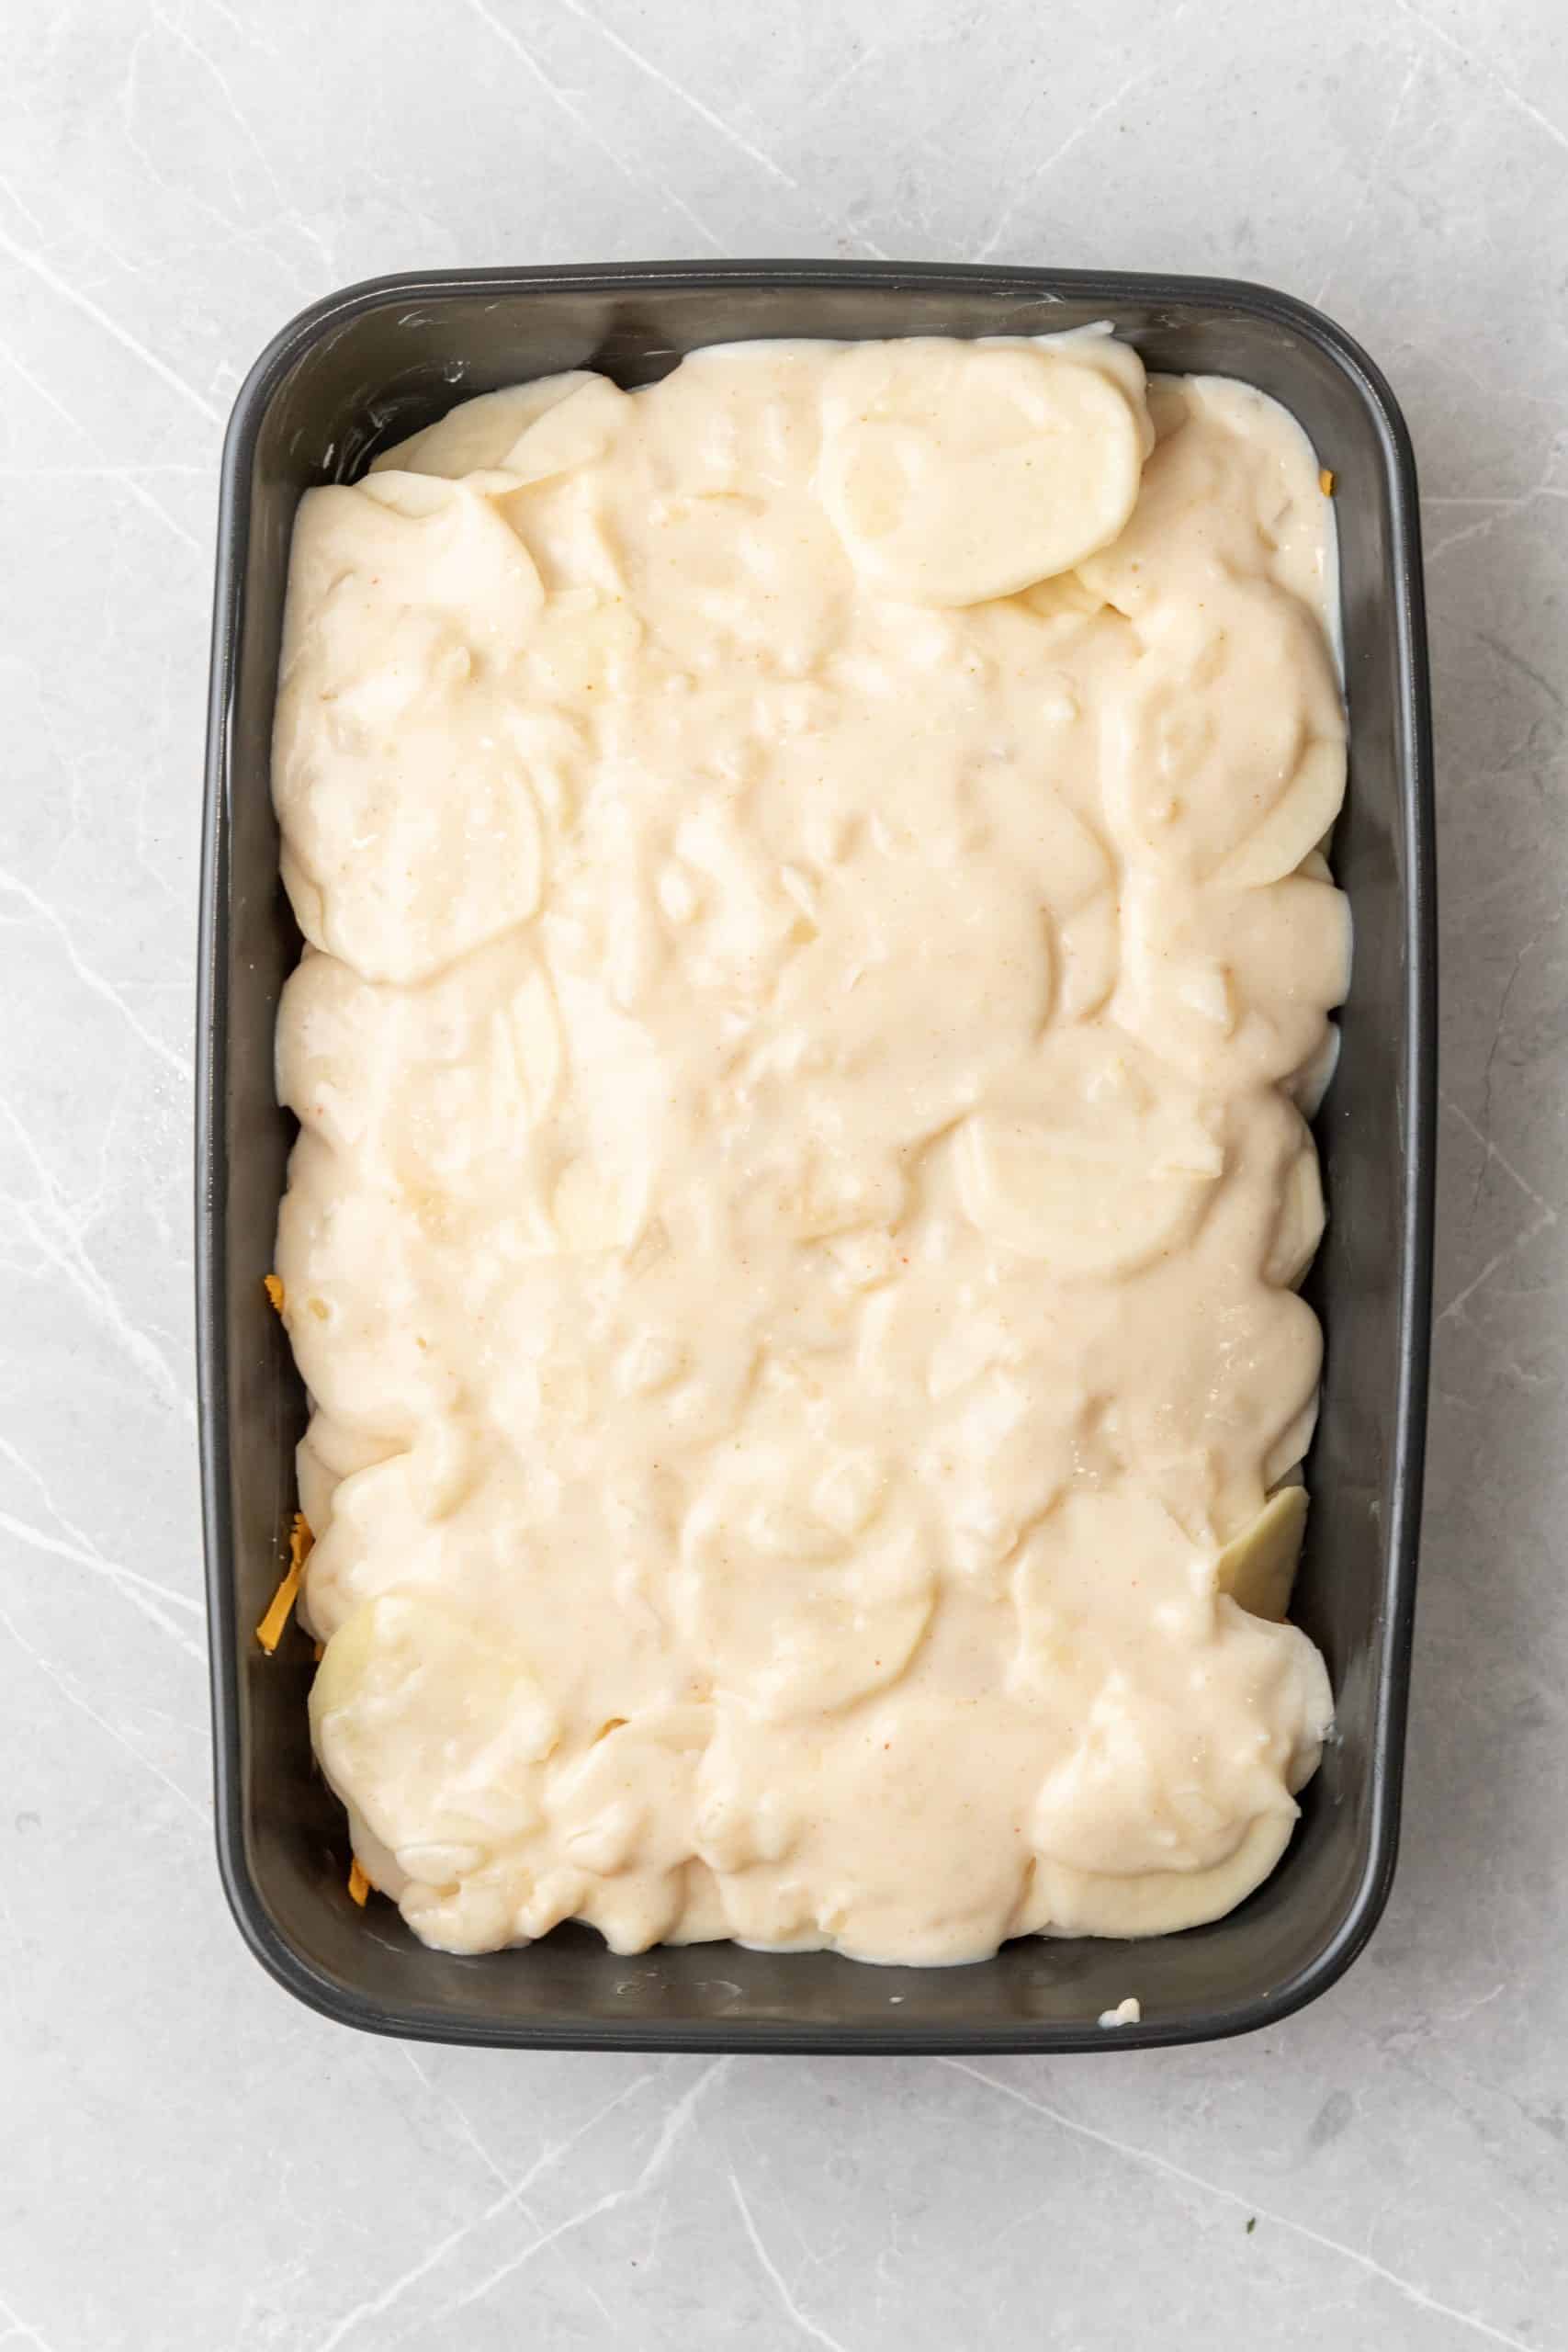 a creamy roux spread over thinly sliced potatoes in a black casserole dish